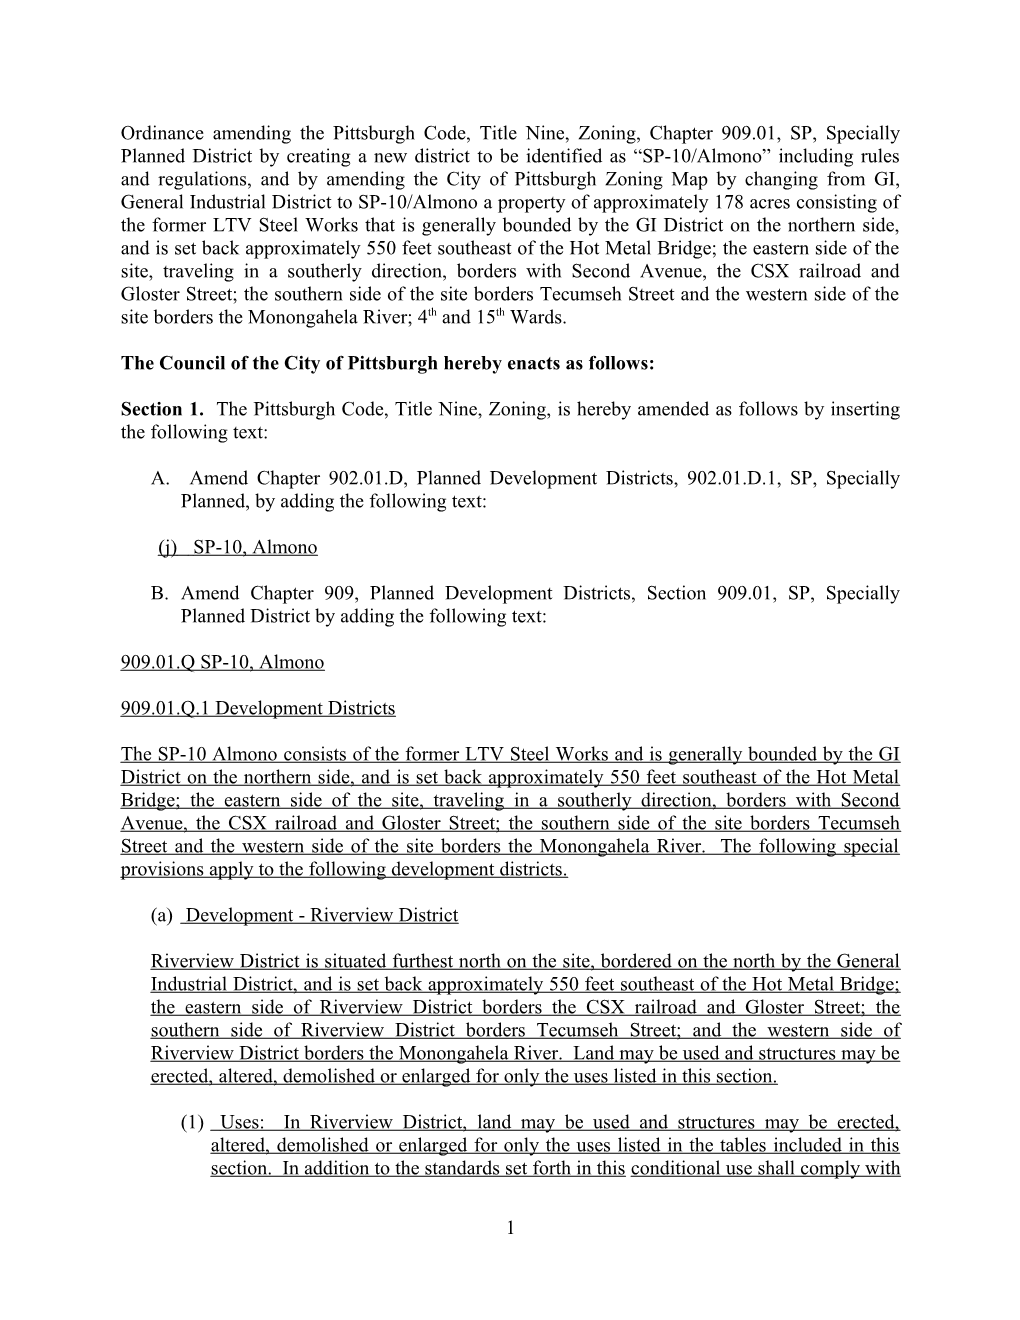 Almono SP Ordinance Text (Final Submitted Version - Clean) (B1171562;3)